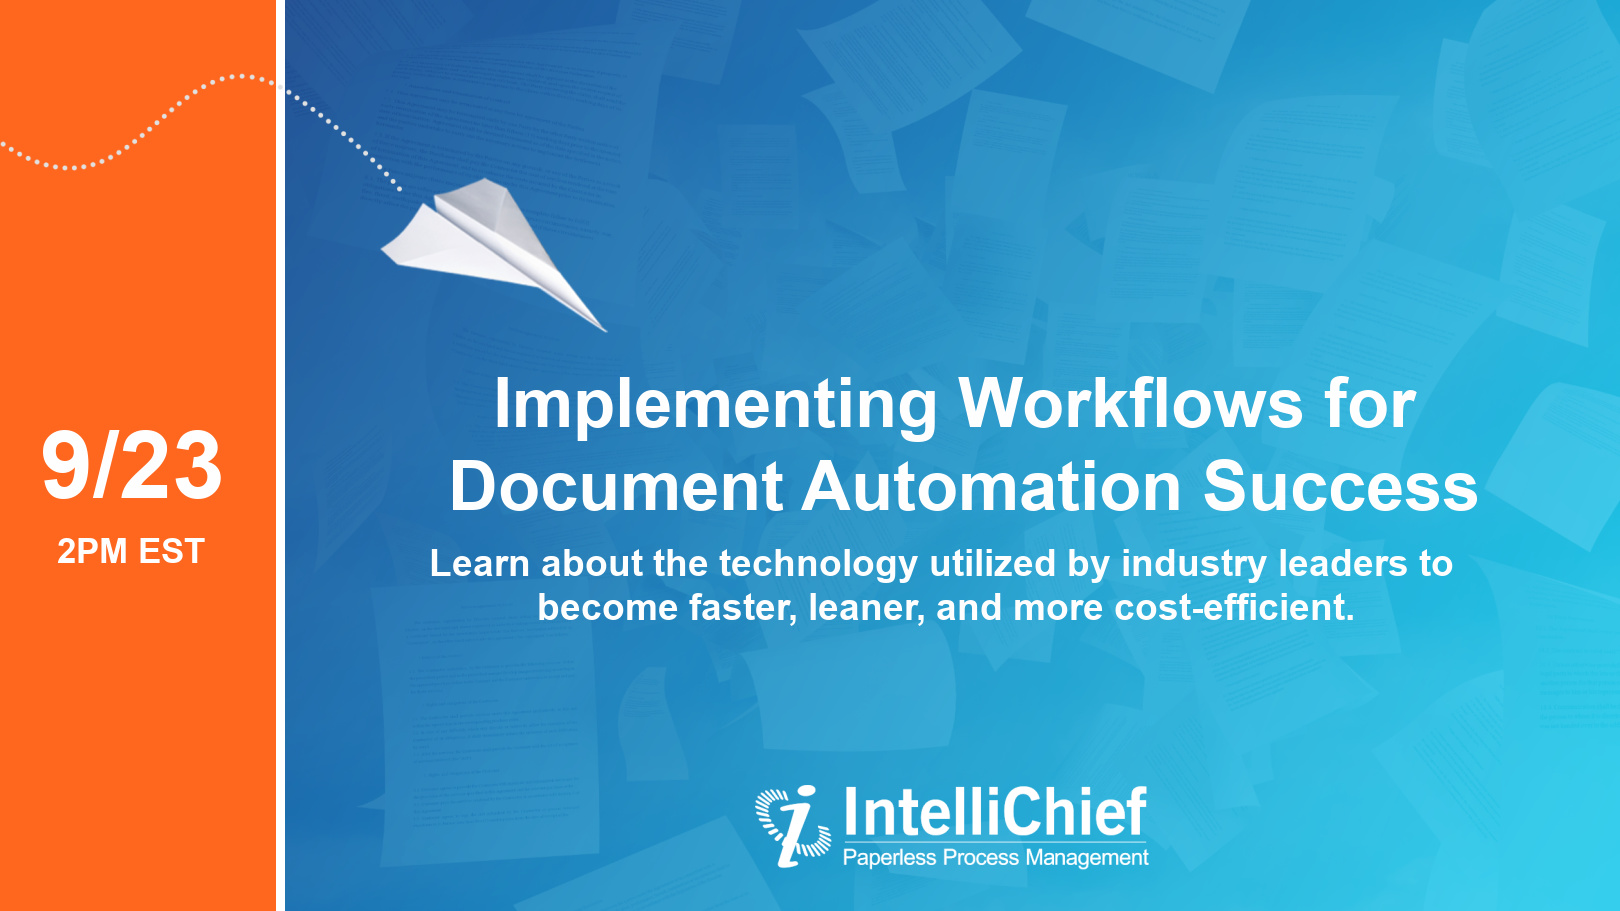 Implementing Workflows for Document Automation Success